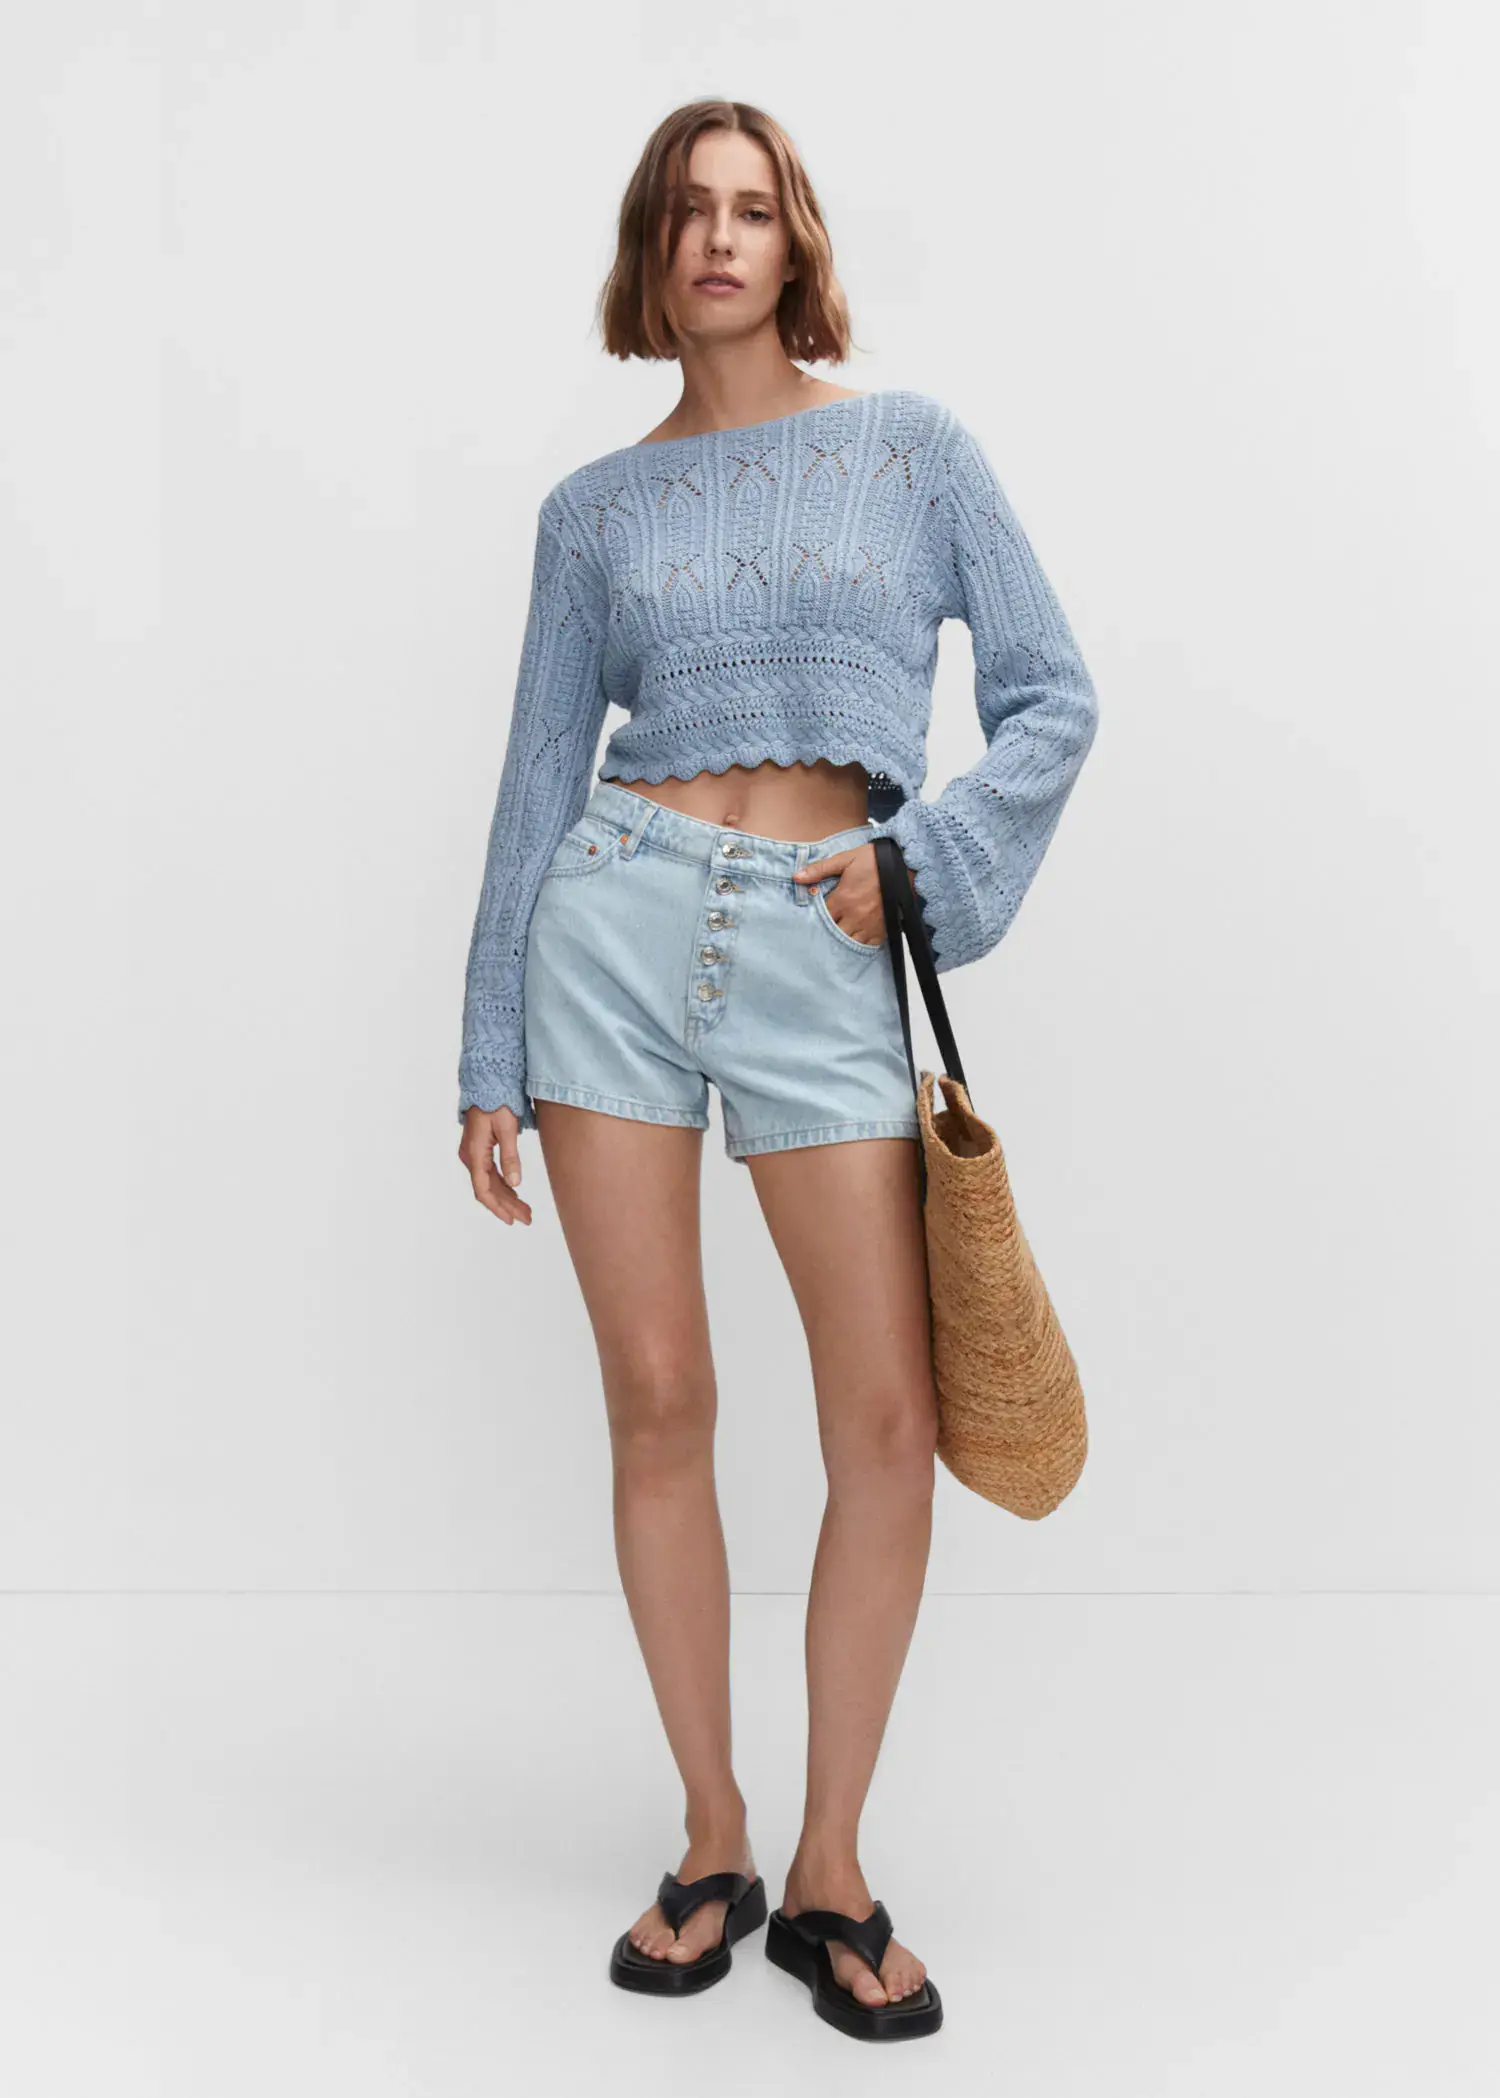 Mango Denim shorts with buttons. a woman in a blue sweater and shorts holding a bag. 